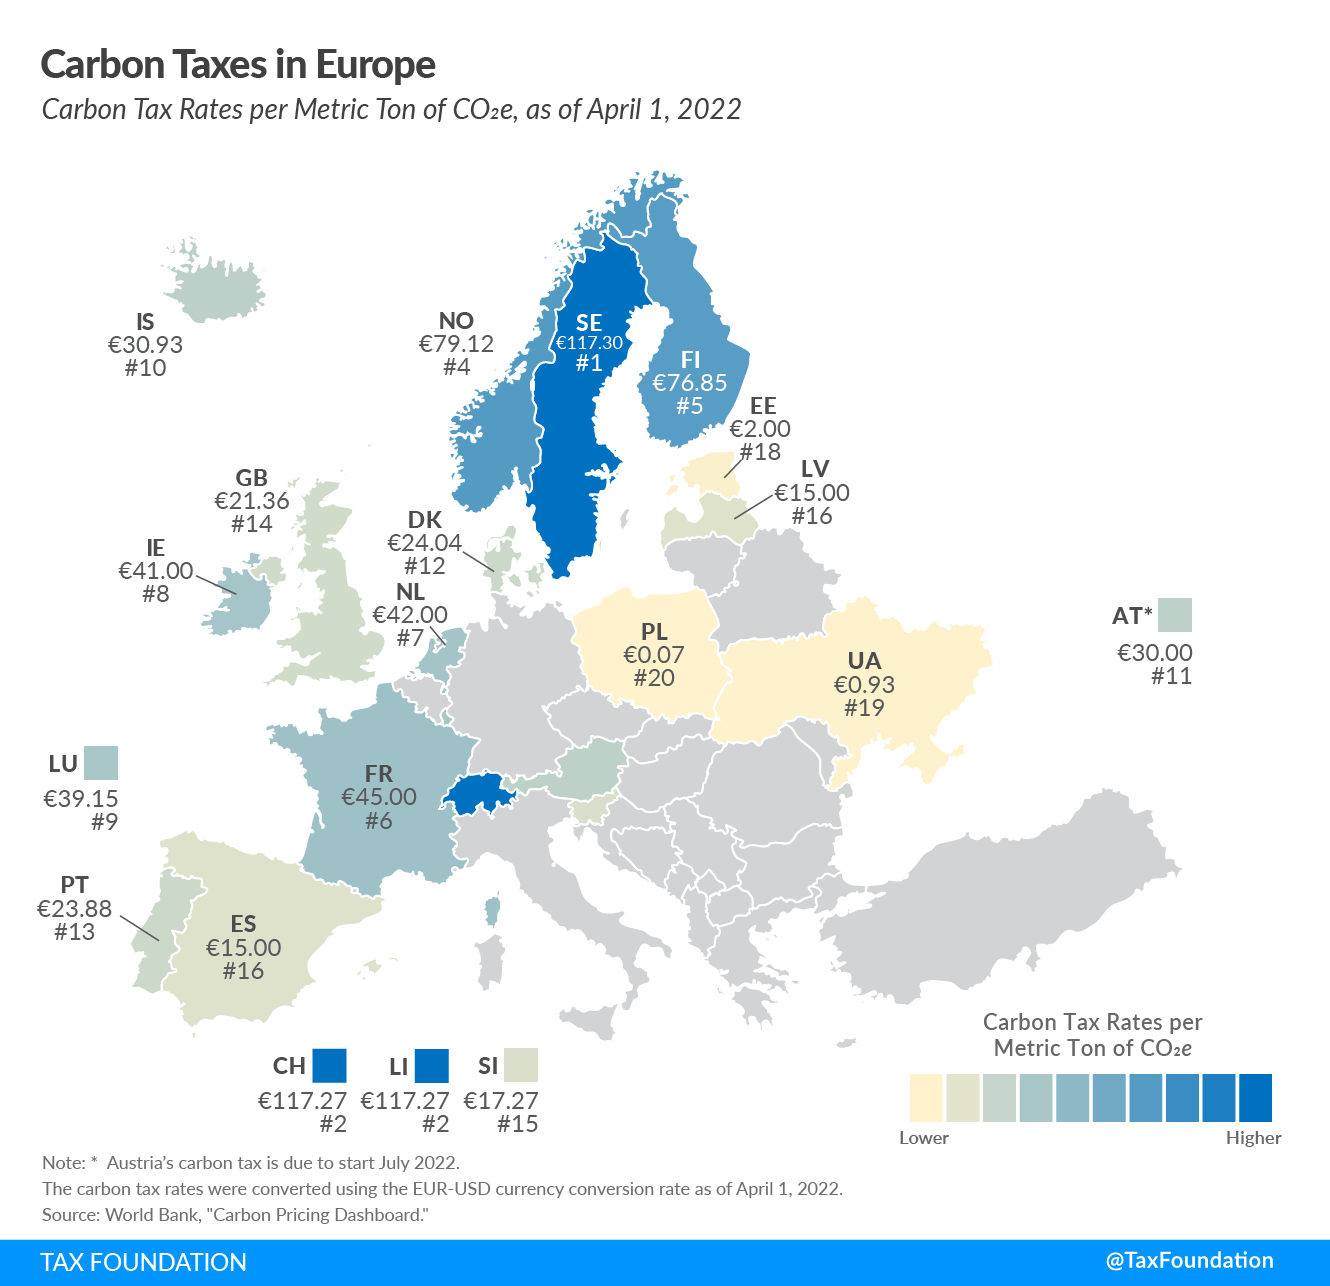 Carbon taxes in Europe 2022 carbon tax rates in Europe EU carbon tax